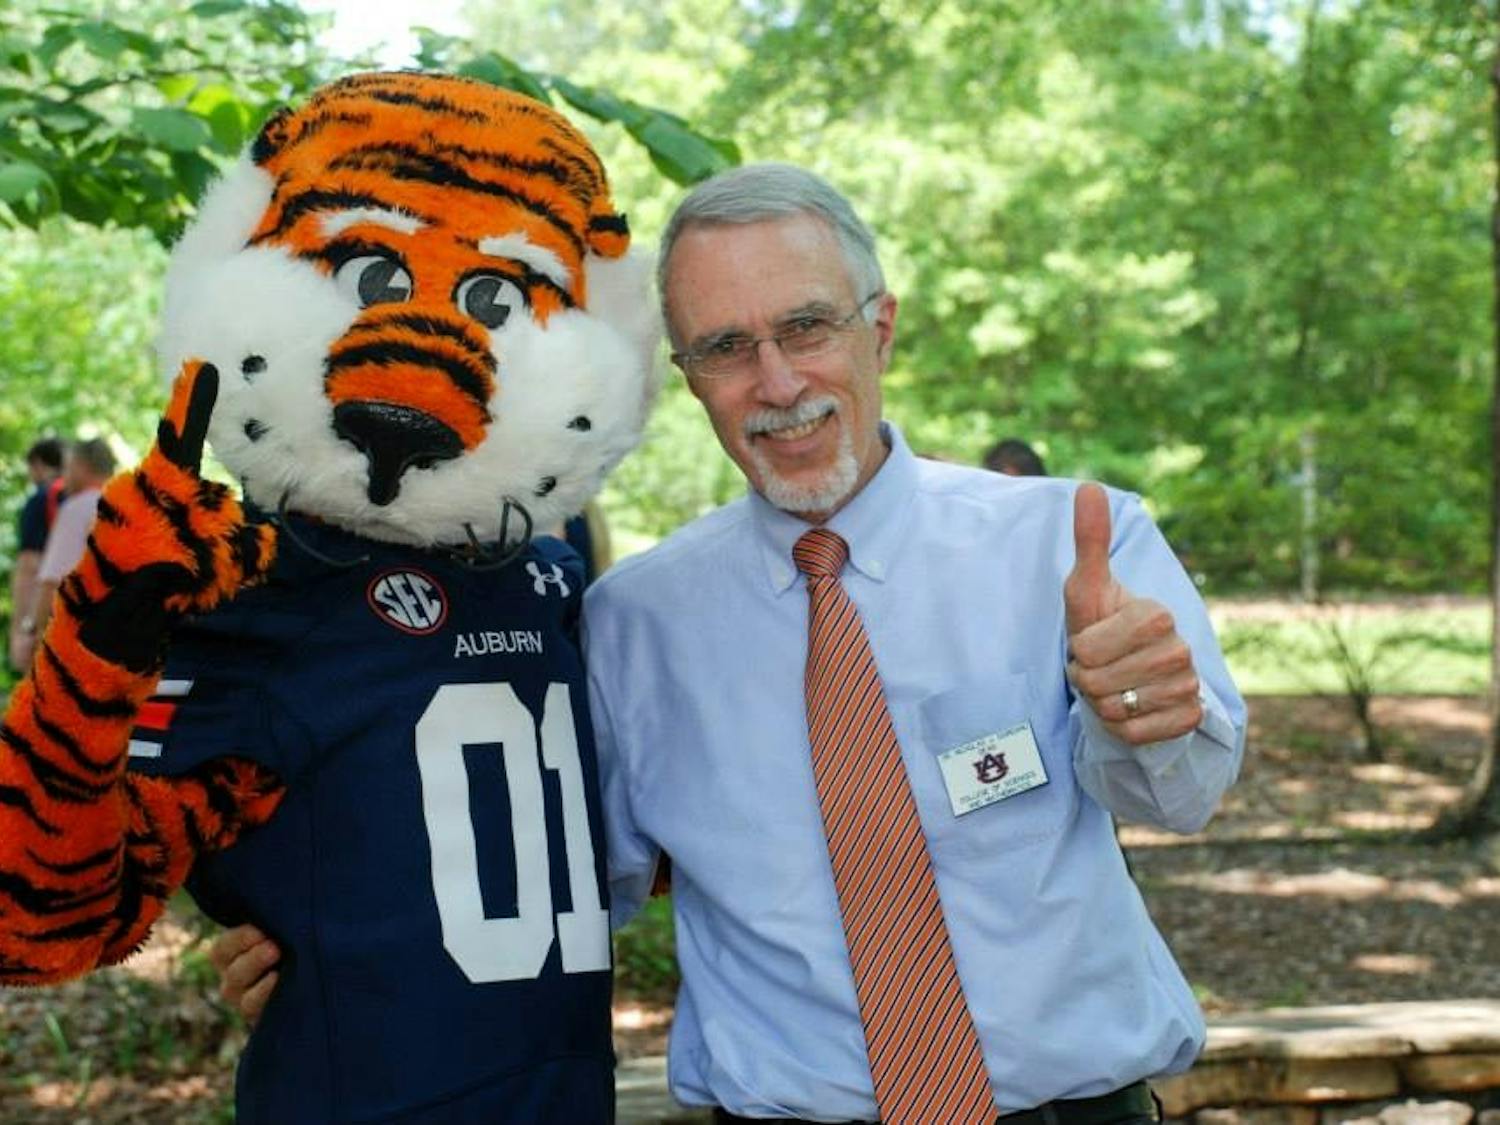 COSAM Dean Nicholas Giordano gives a thumbs-up with Aubie.